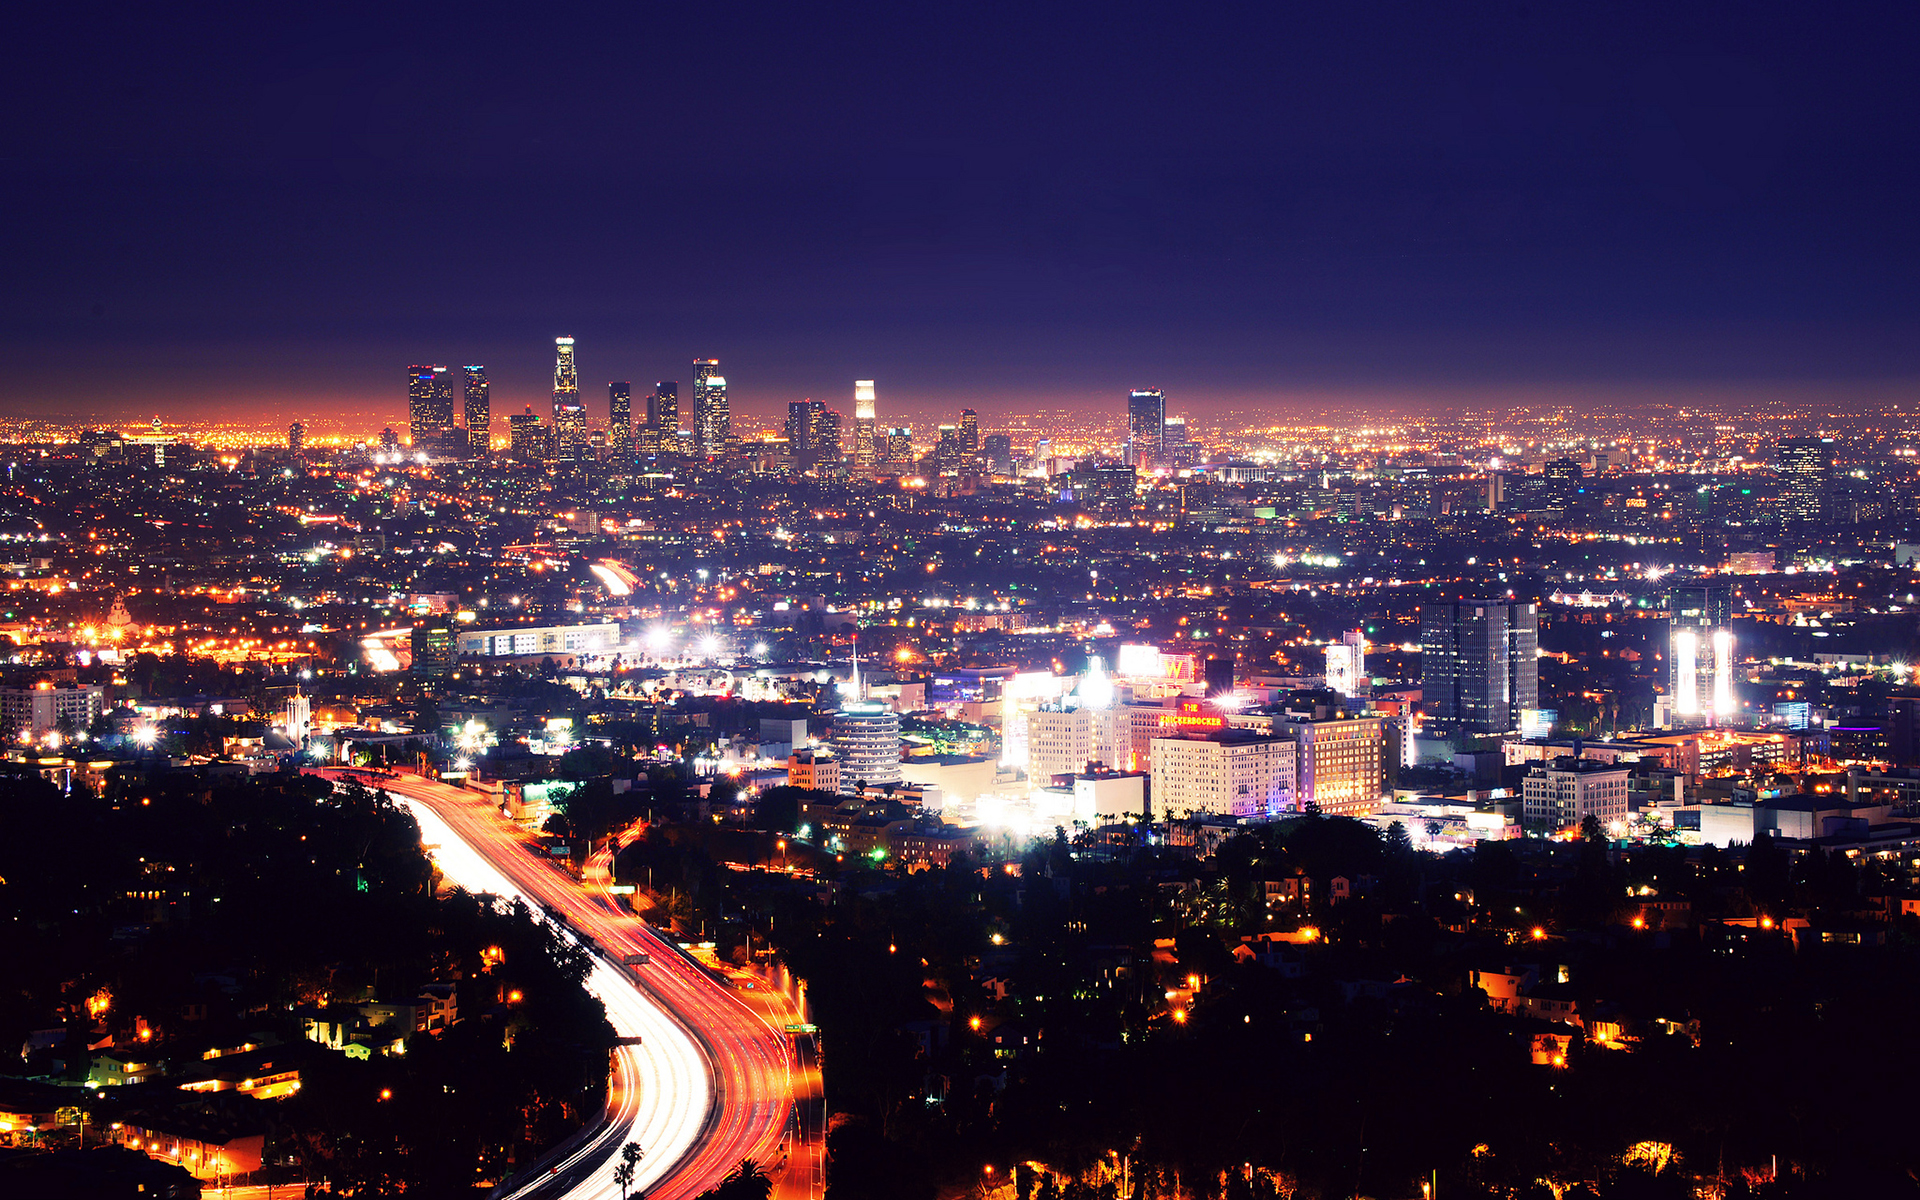 los, Angeles, Cities, Architecture, Buildings, Skyscrapers, Night